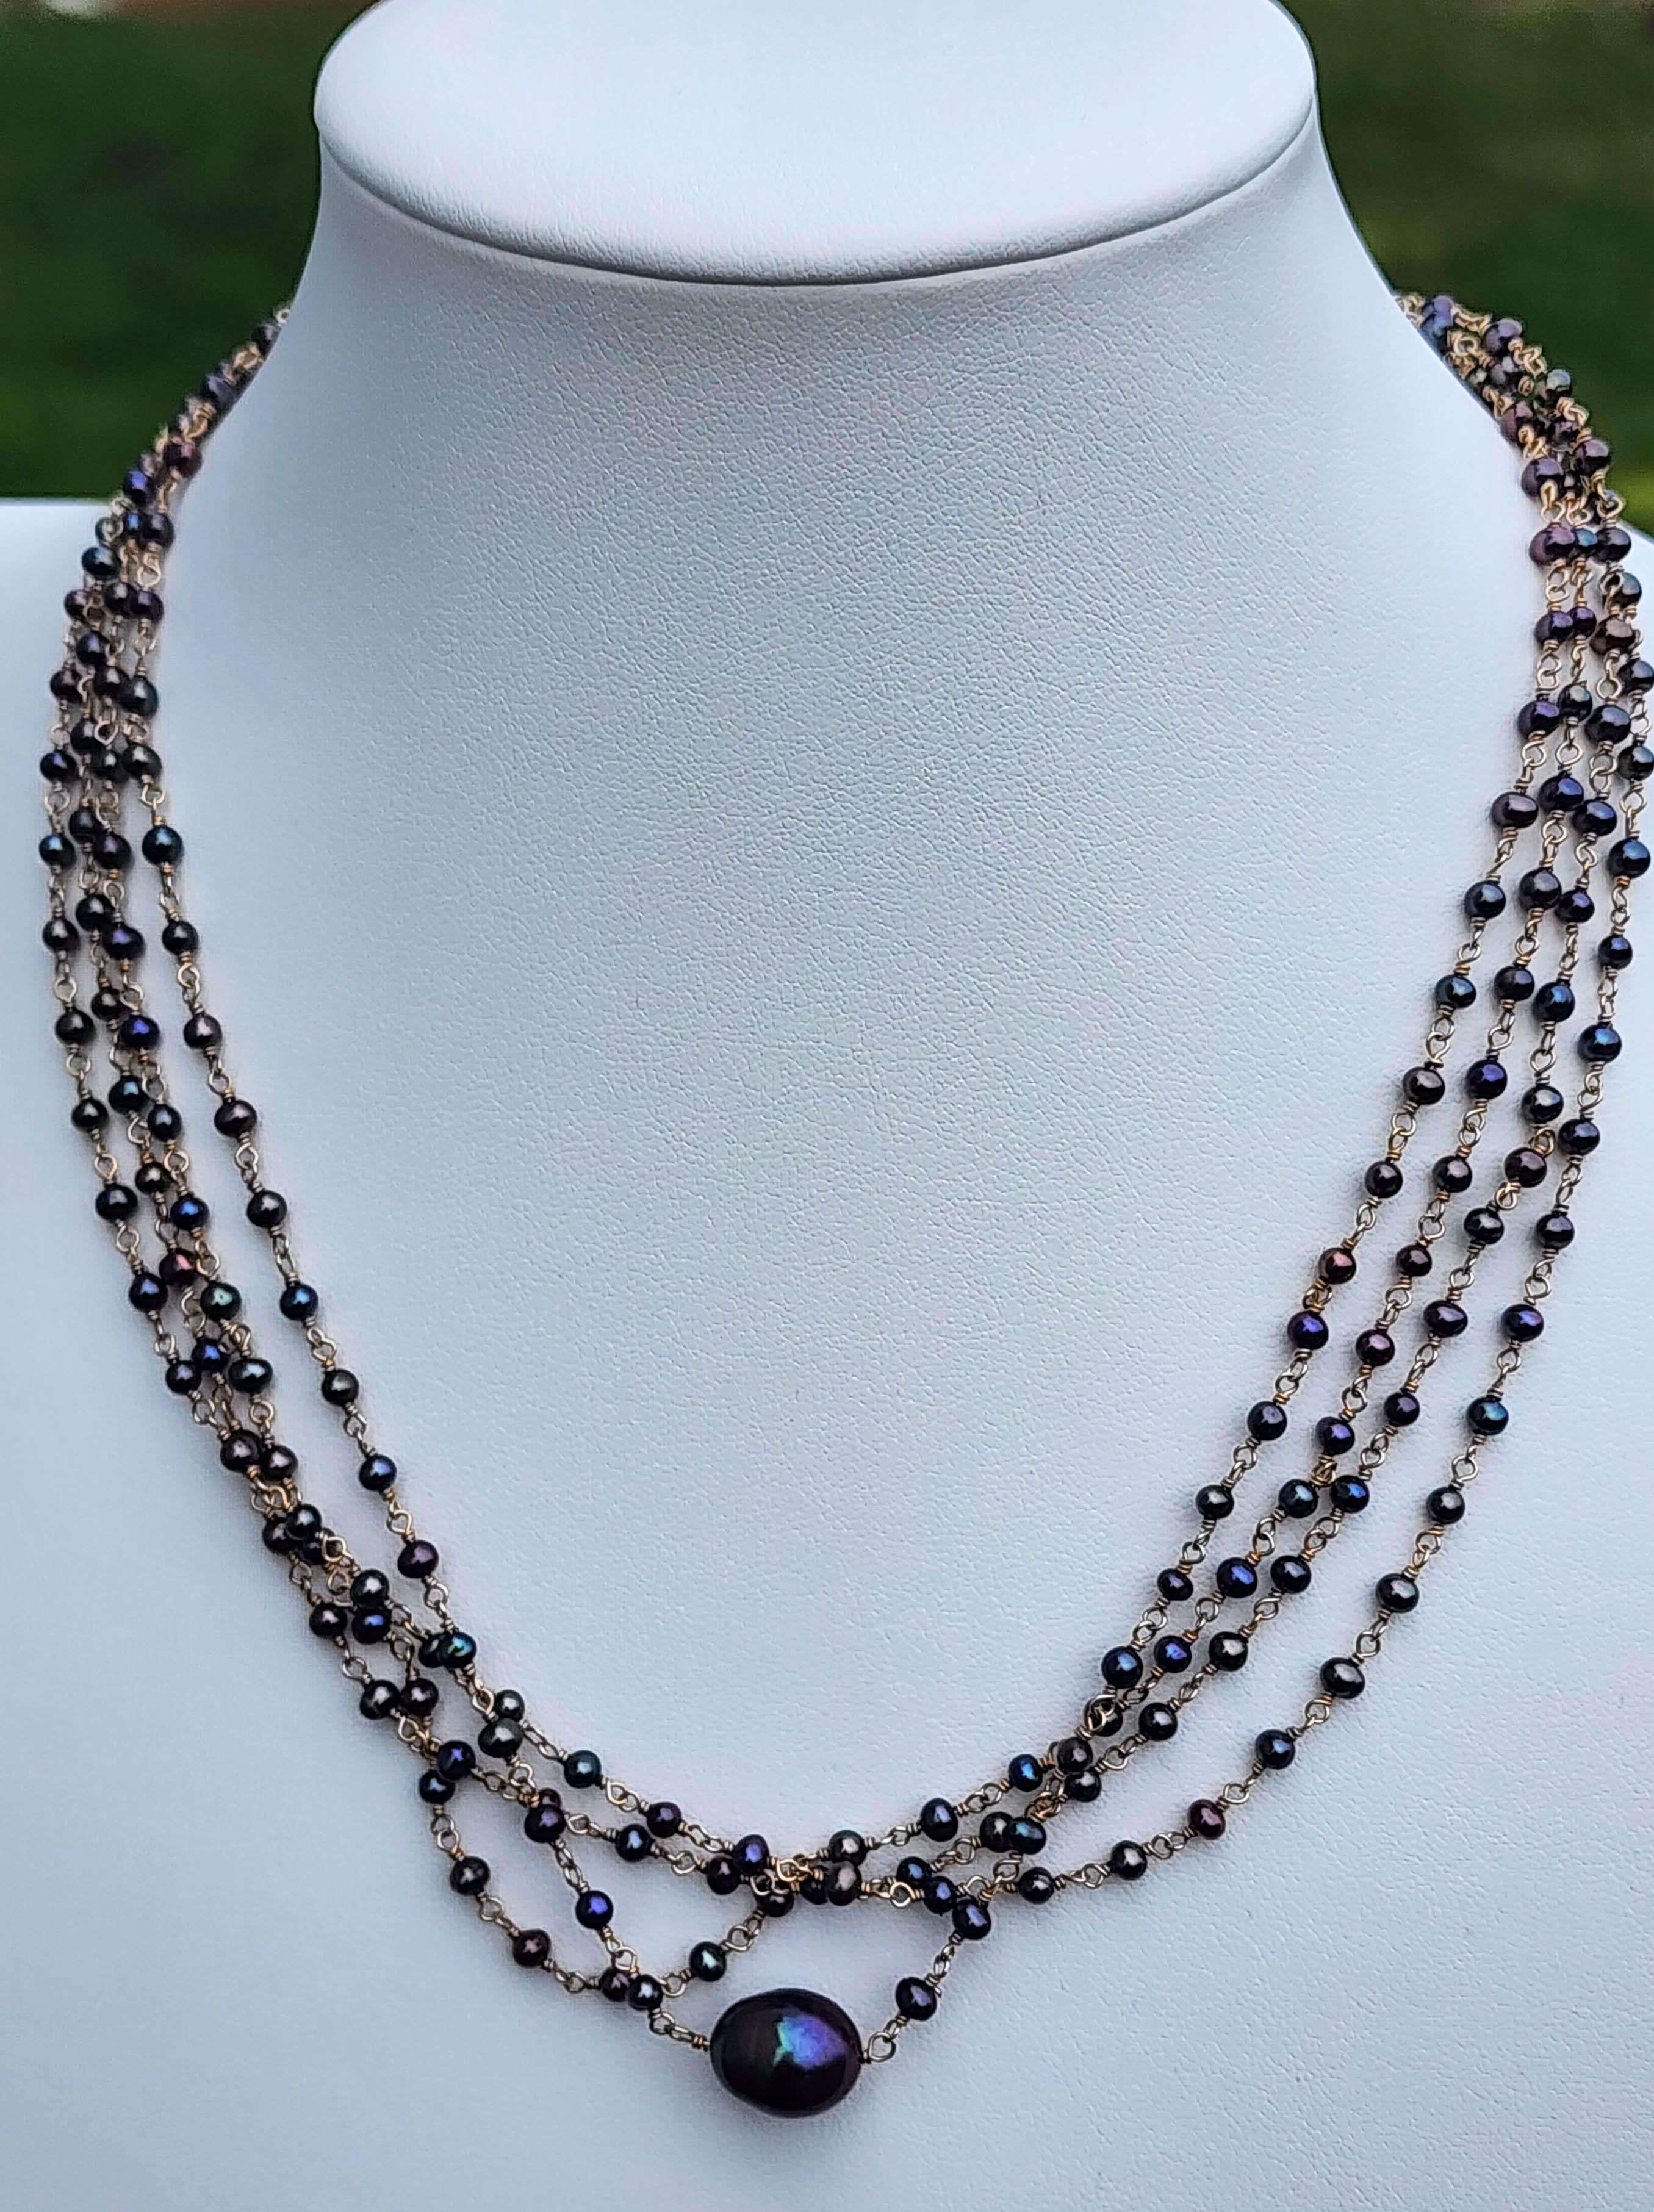 A South Sea Pearl Necklace of 75 inches total length meant to be trebled or quadrupled when worn. Comprised of 300 cultured salt water pearls each 3mm, and one large South Sea pearl 10.6mm x 12.8mm. Each pearl is drilled and strung with 14k gold